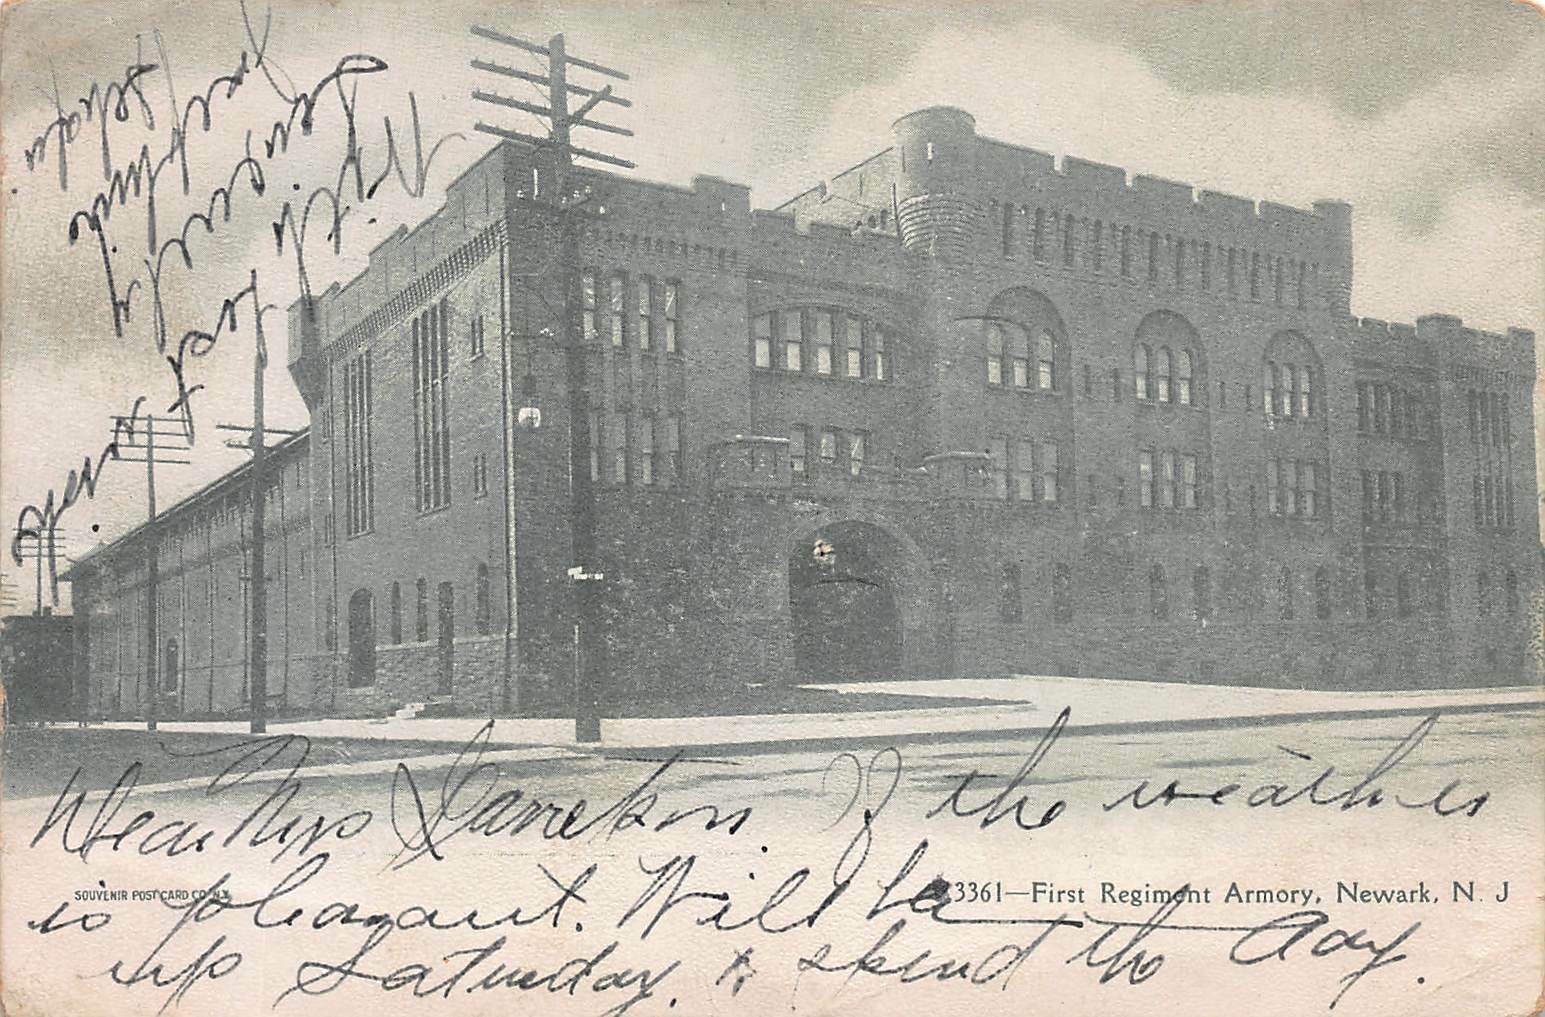 First Regiment Armory, Newark, N.J., Early Postcard, Used in 1906